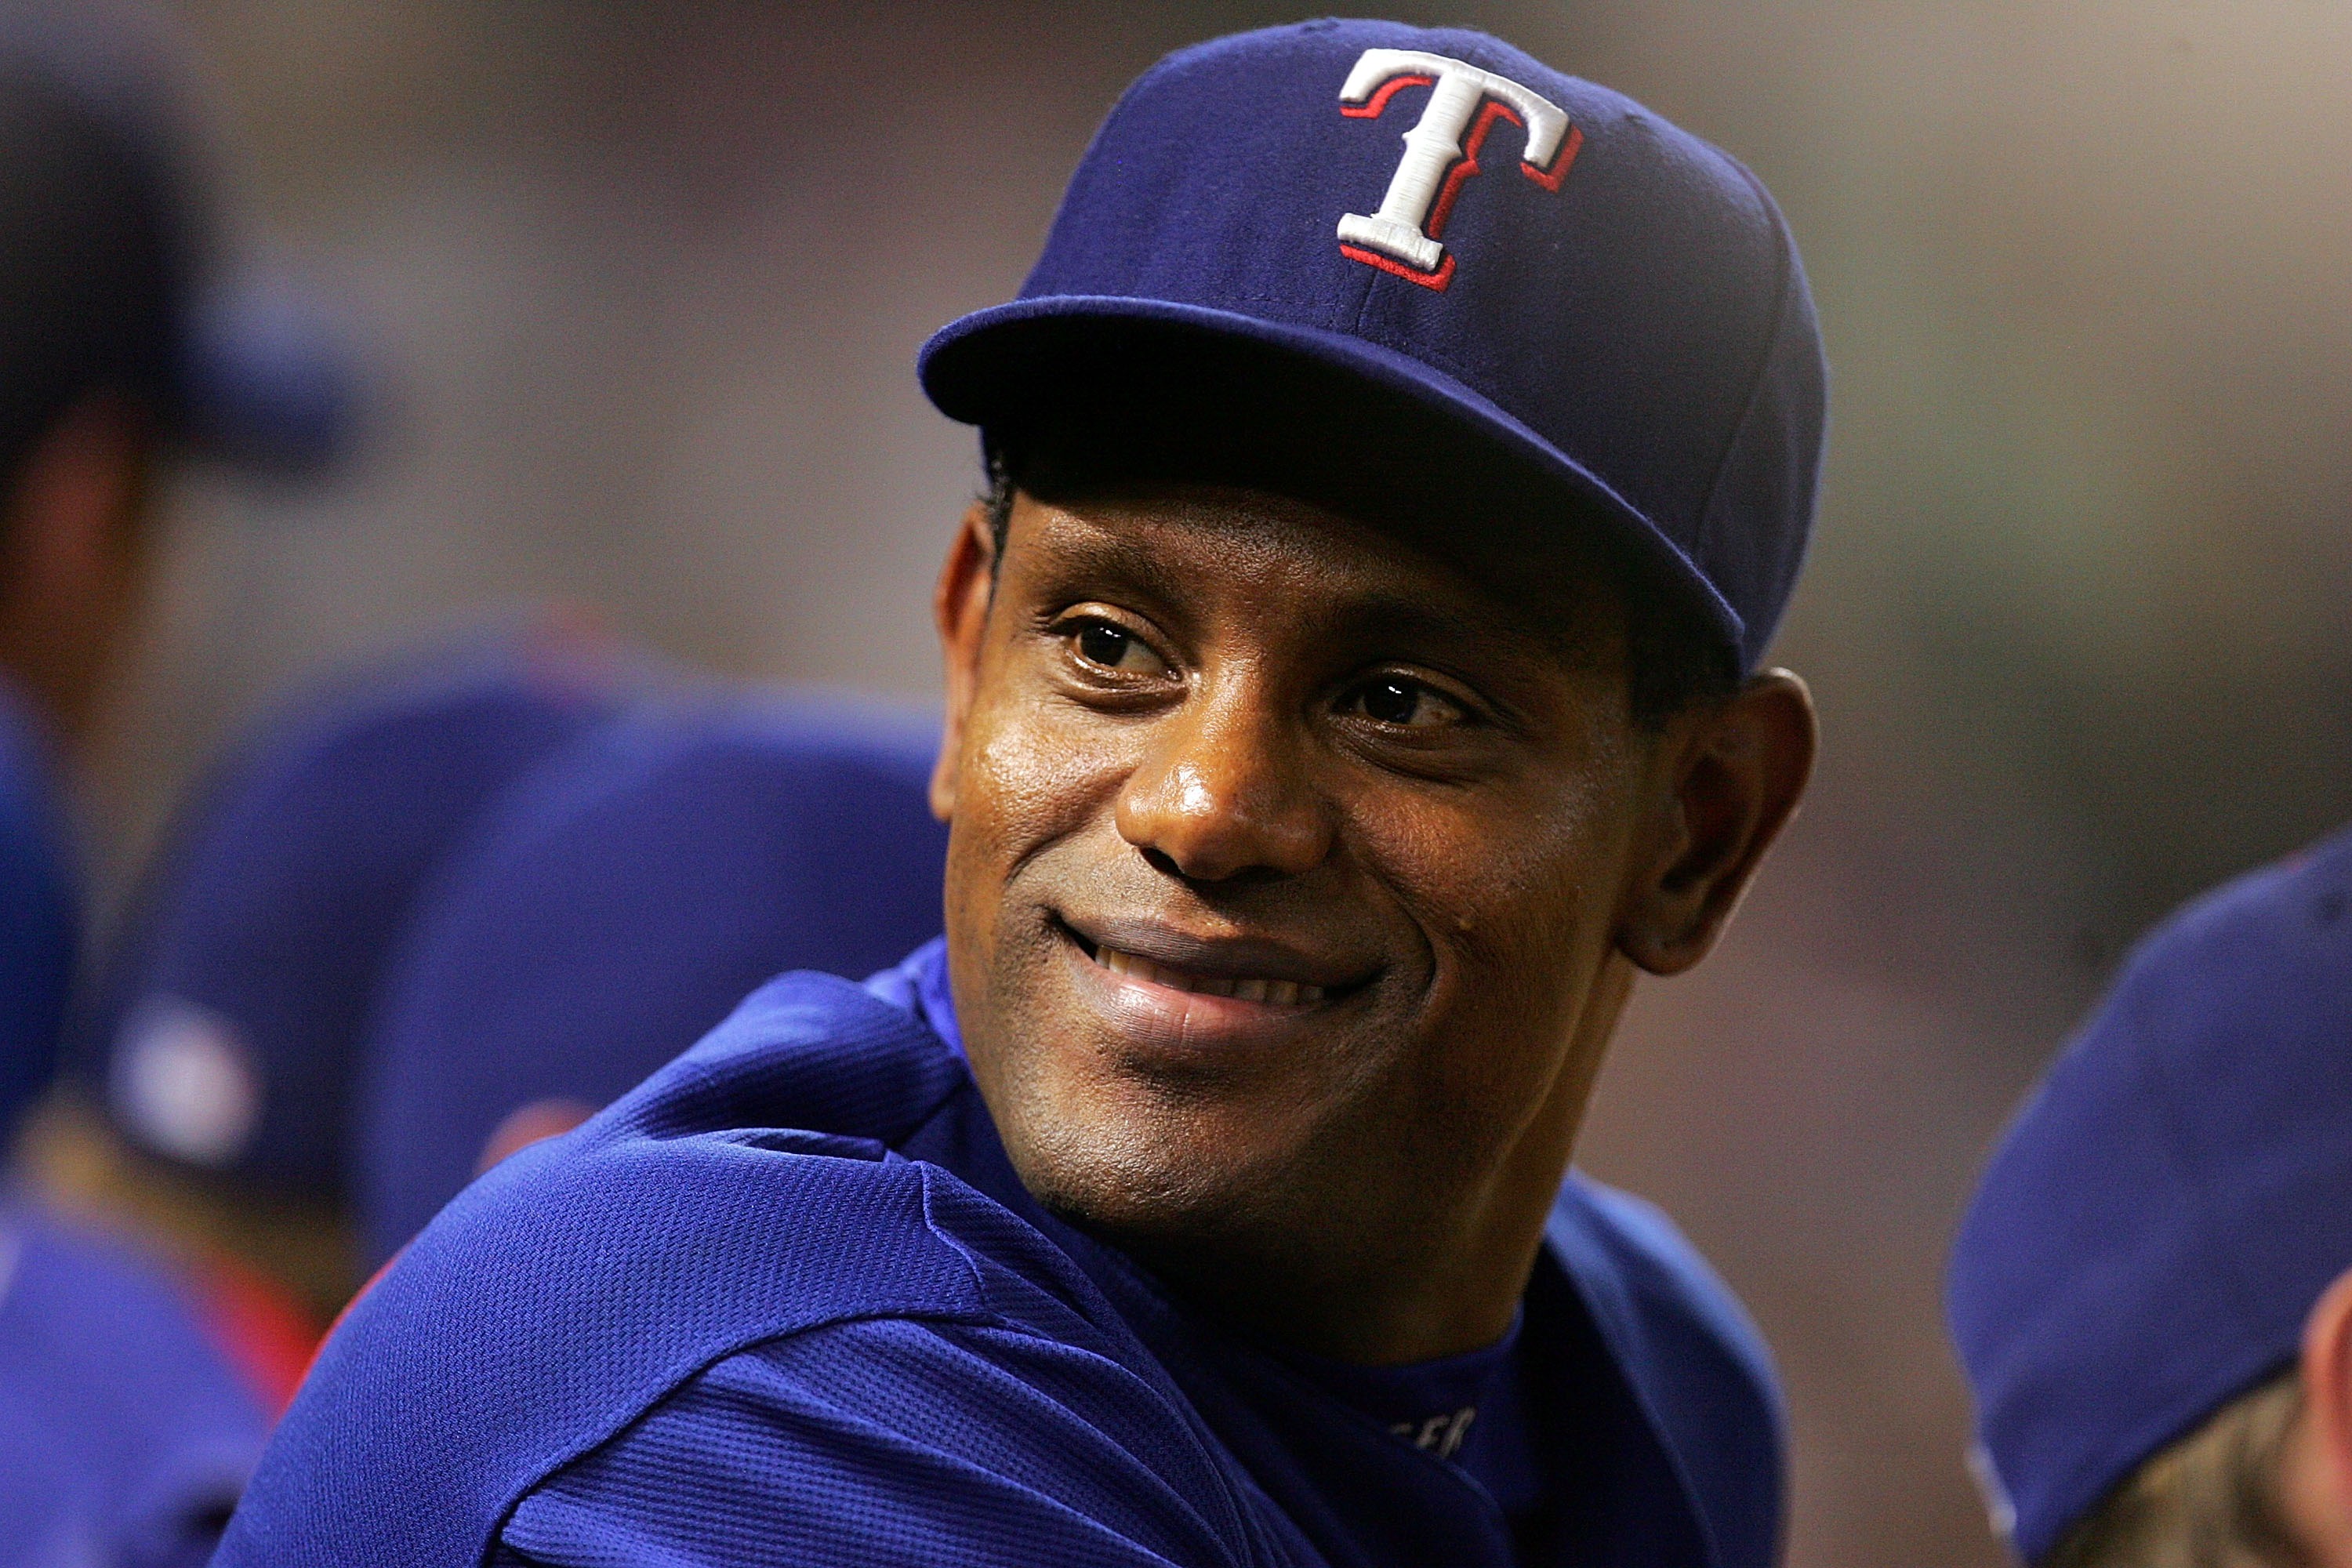 What You Didn't Know About Sammy Sosa